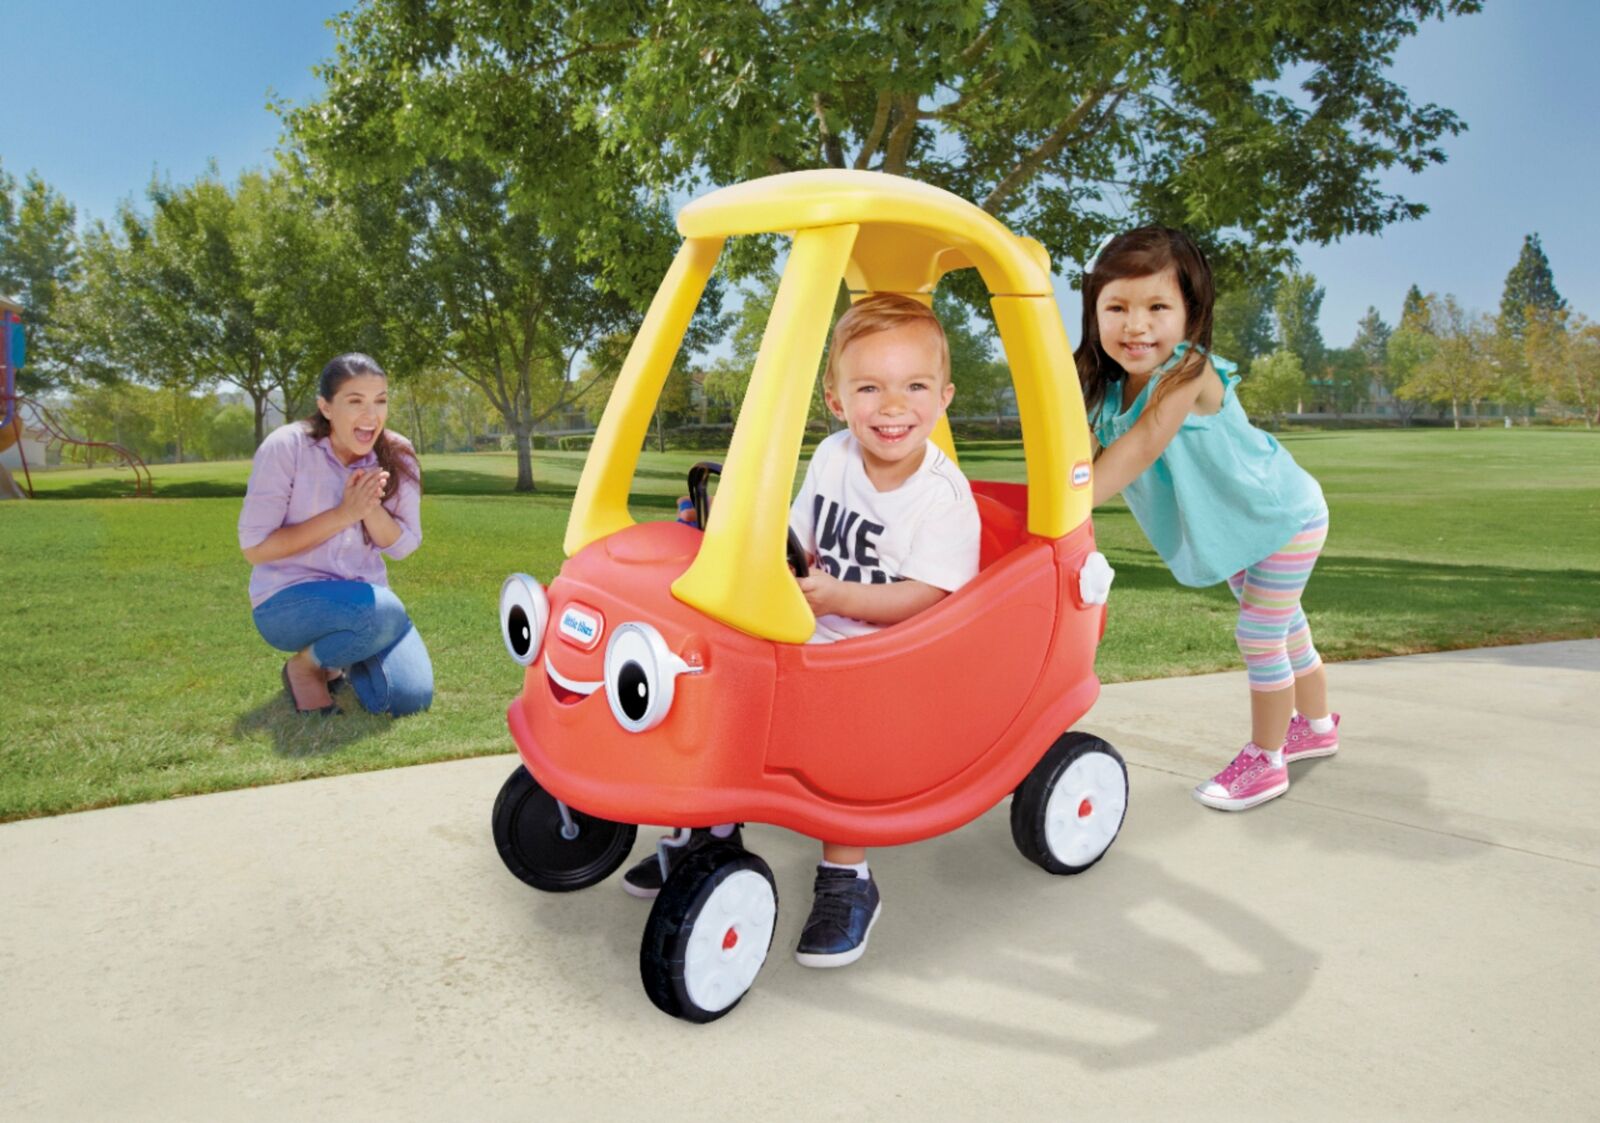 Little Tikes Cozy Coupe Ride On Toy for Toddlers and Kids! - image 4 of 5